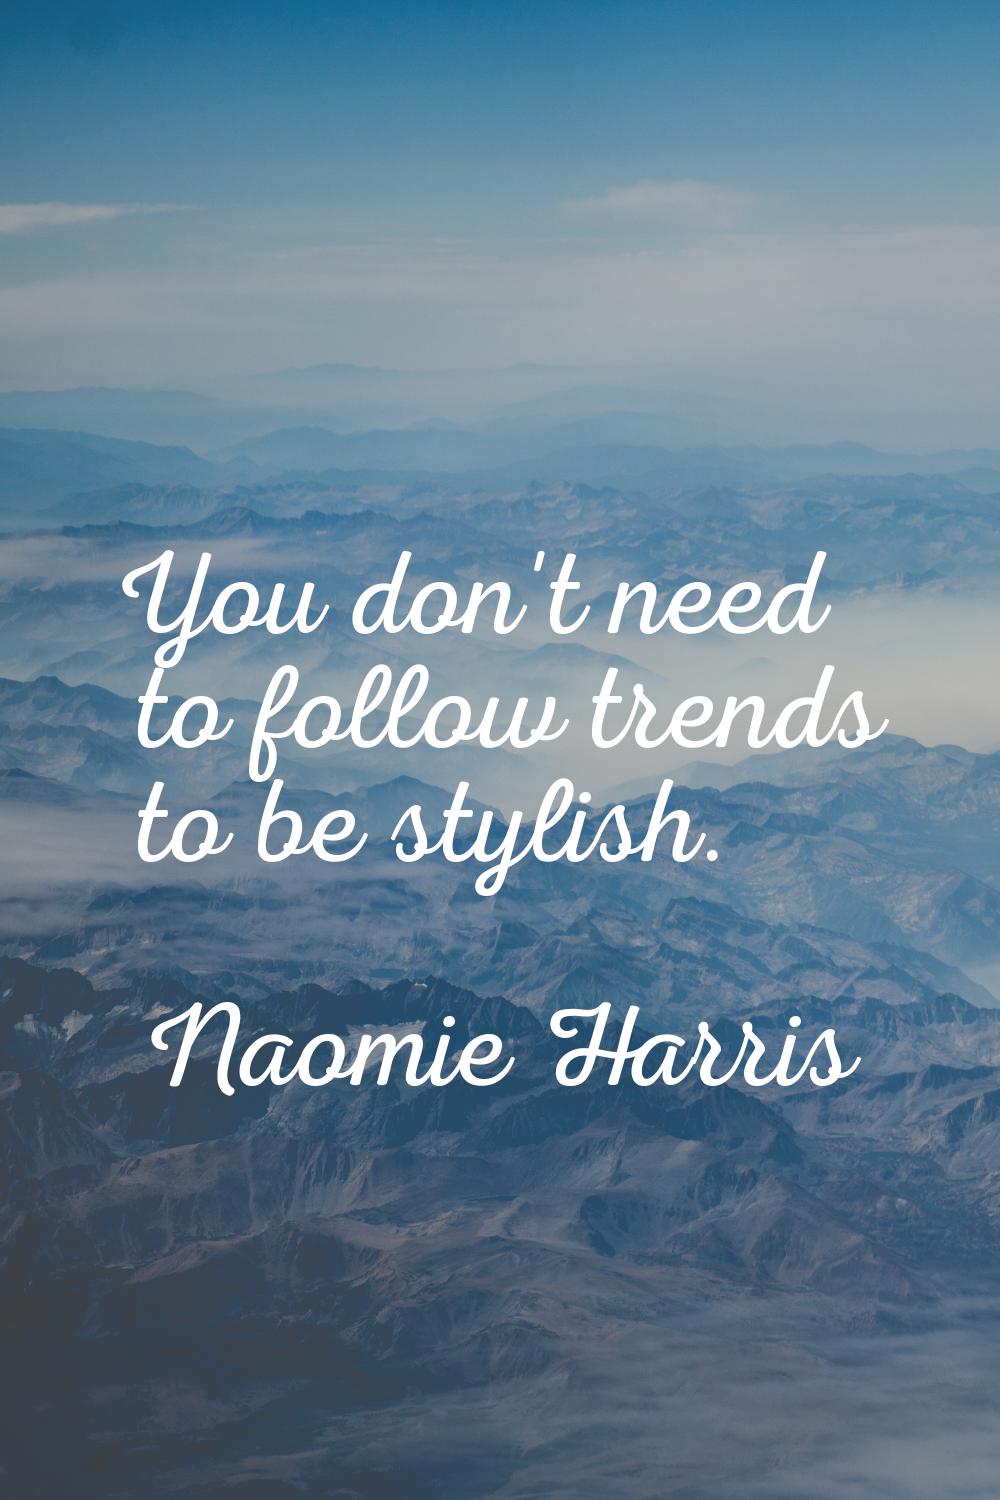 You don't need to follow trends to be stylish.